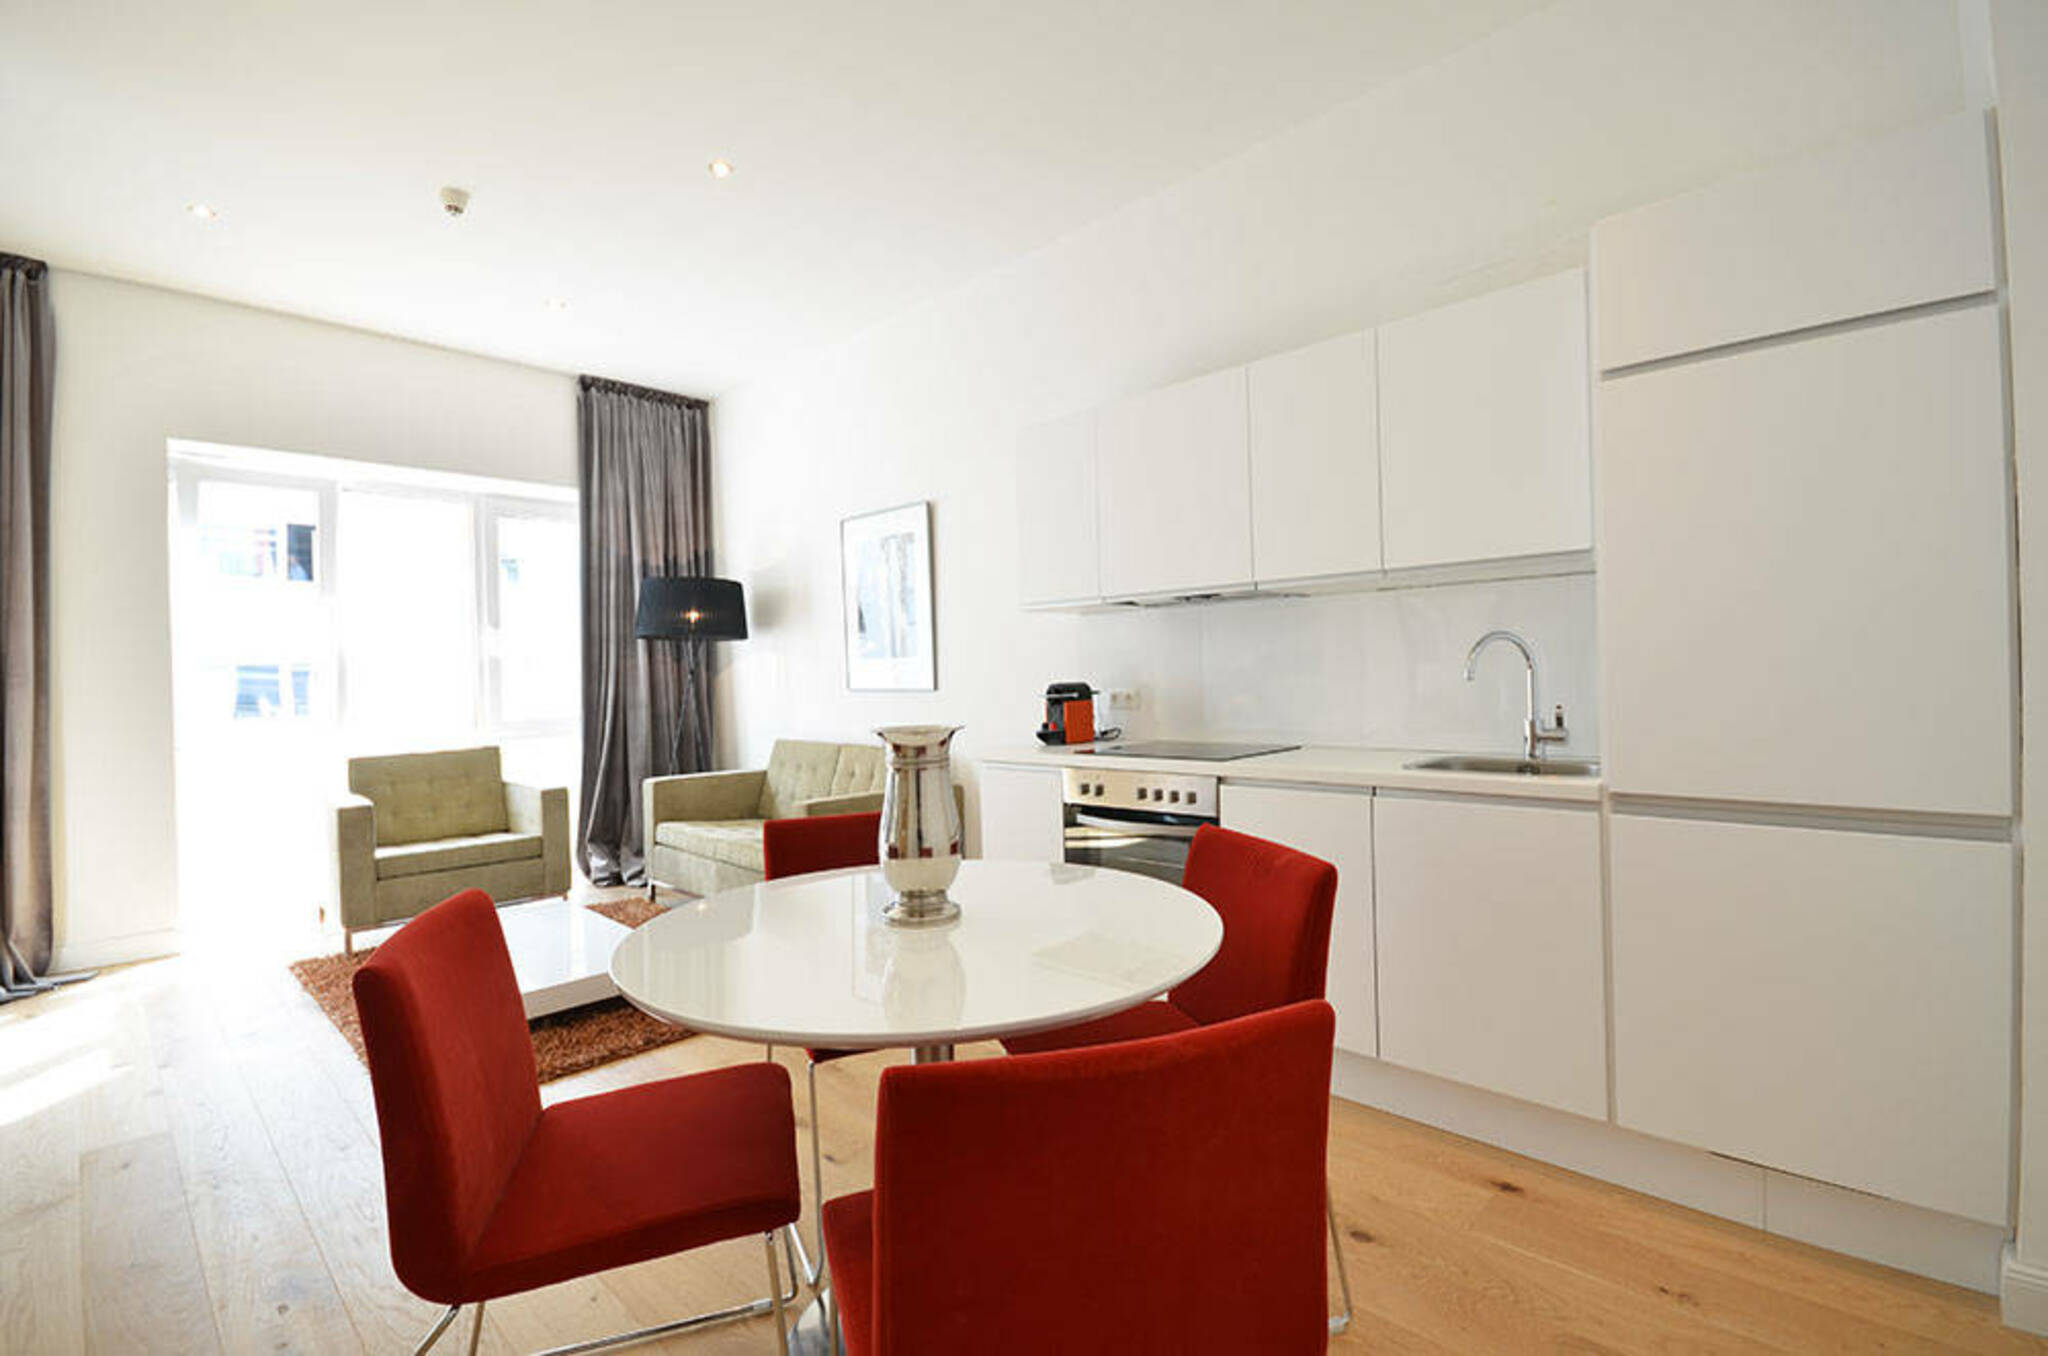 Property Image 2 - Wonderful Modern Apartment close to Many Attractions